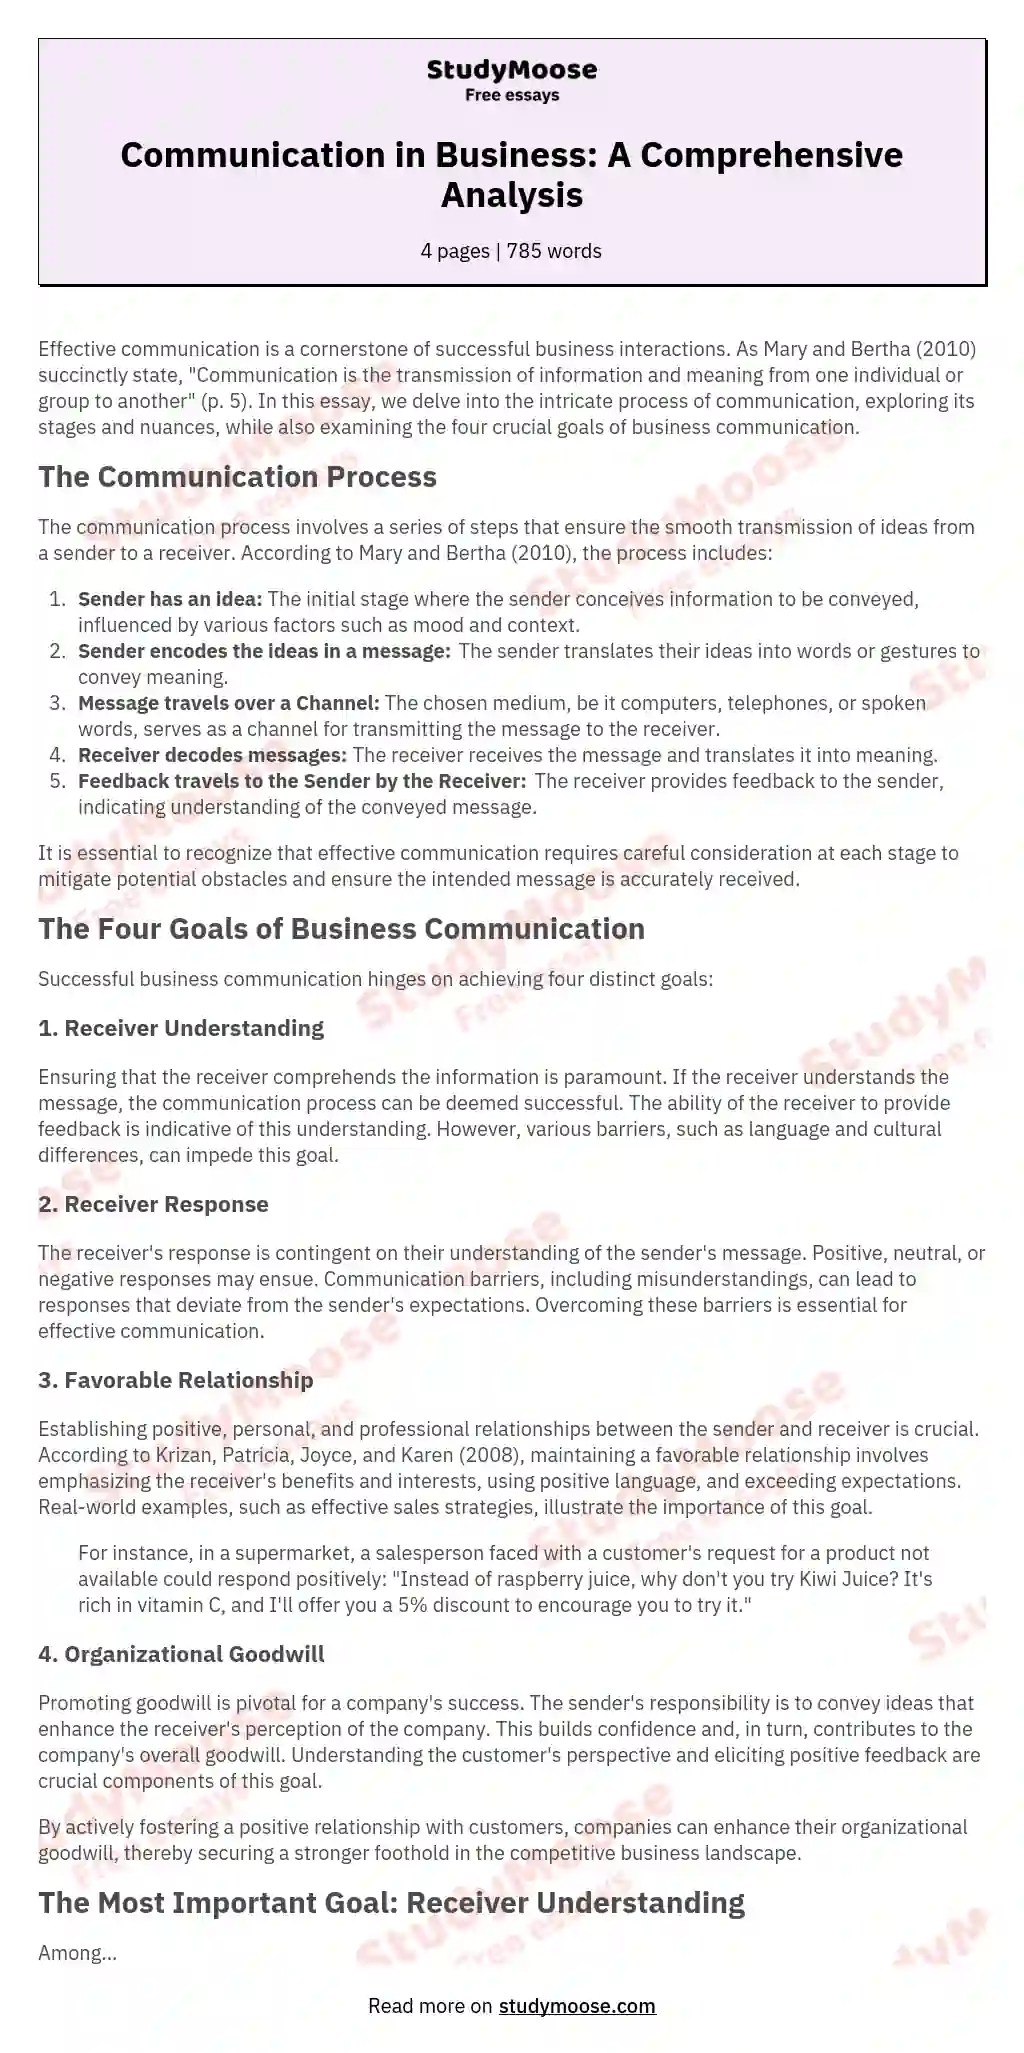 Communication in Business: A Comprehensive Analysis essay